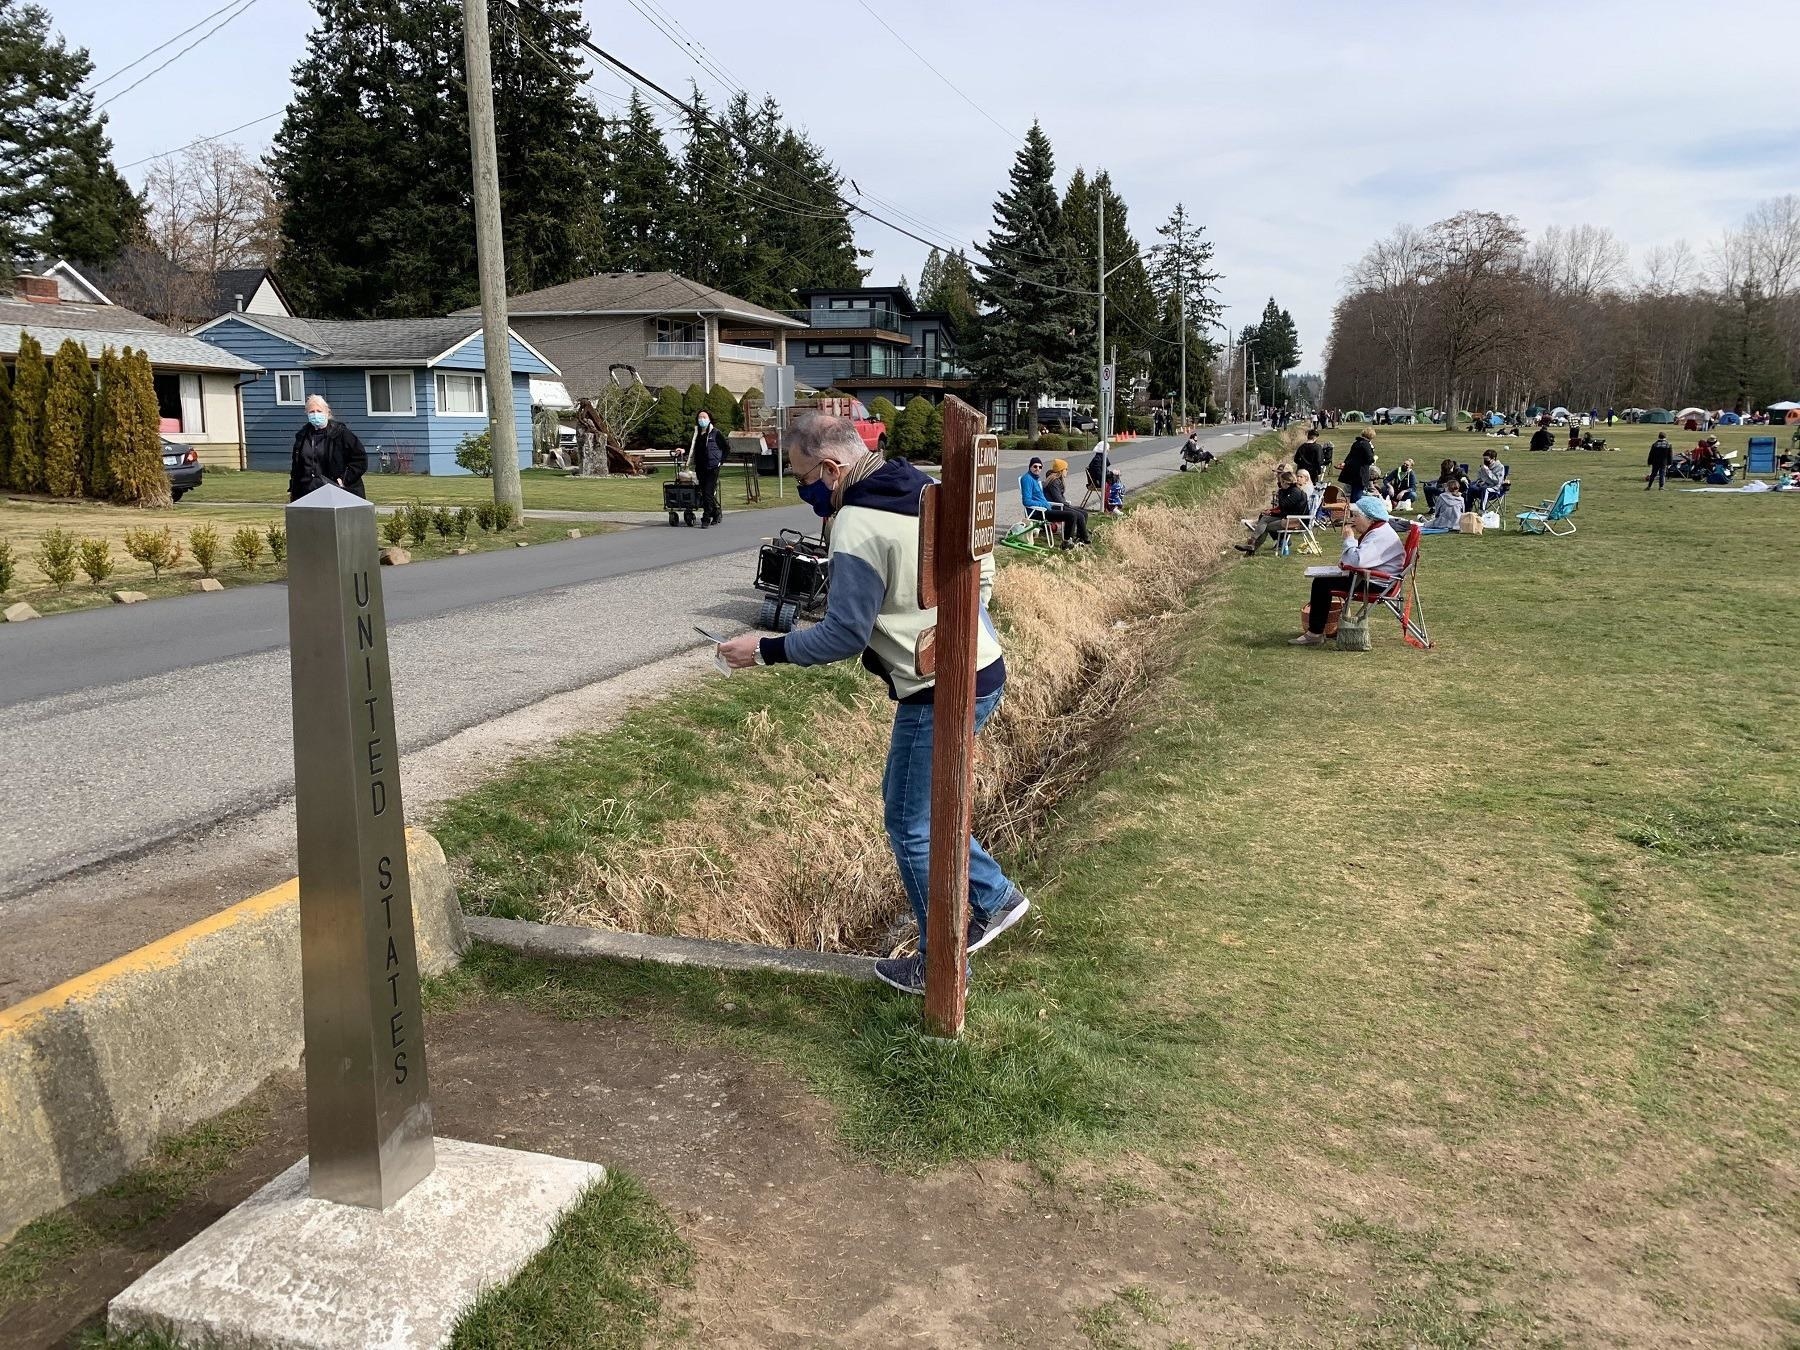 Two poles in the ground separating the US from Canada, with people sitting on the grass on the Canadian side